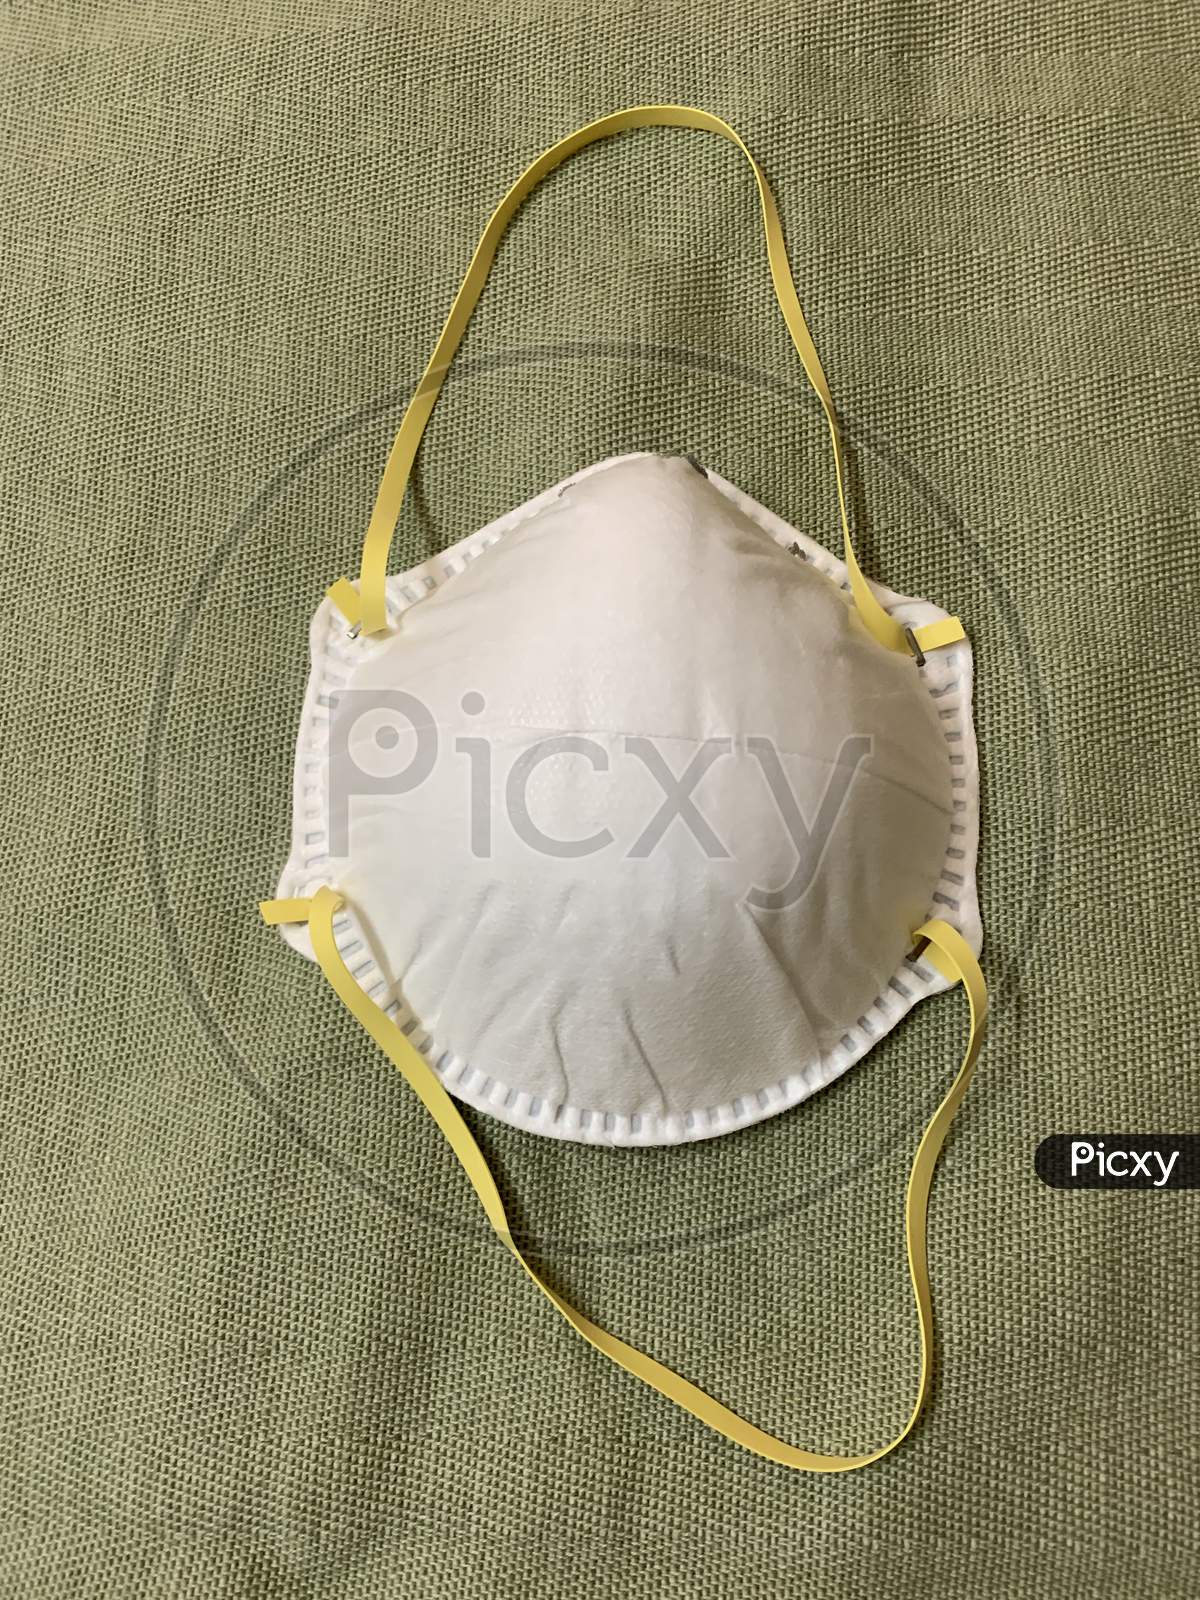 N 95 mask with no labels